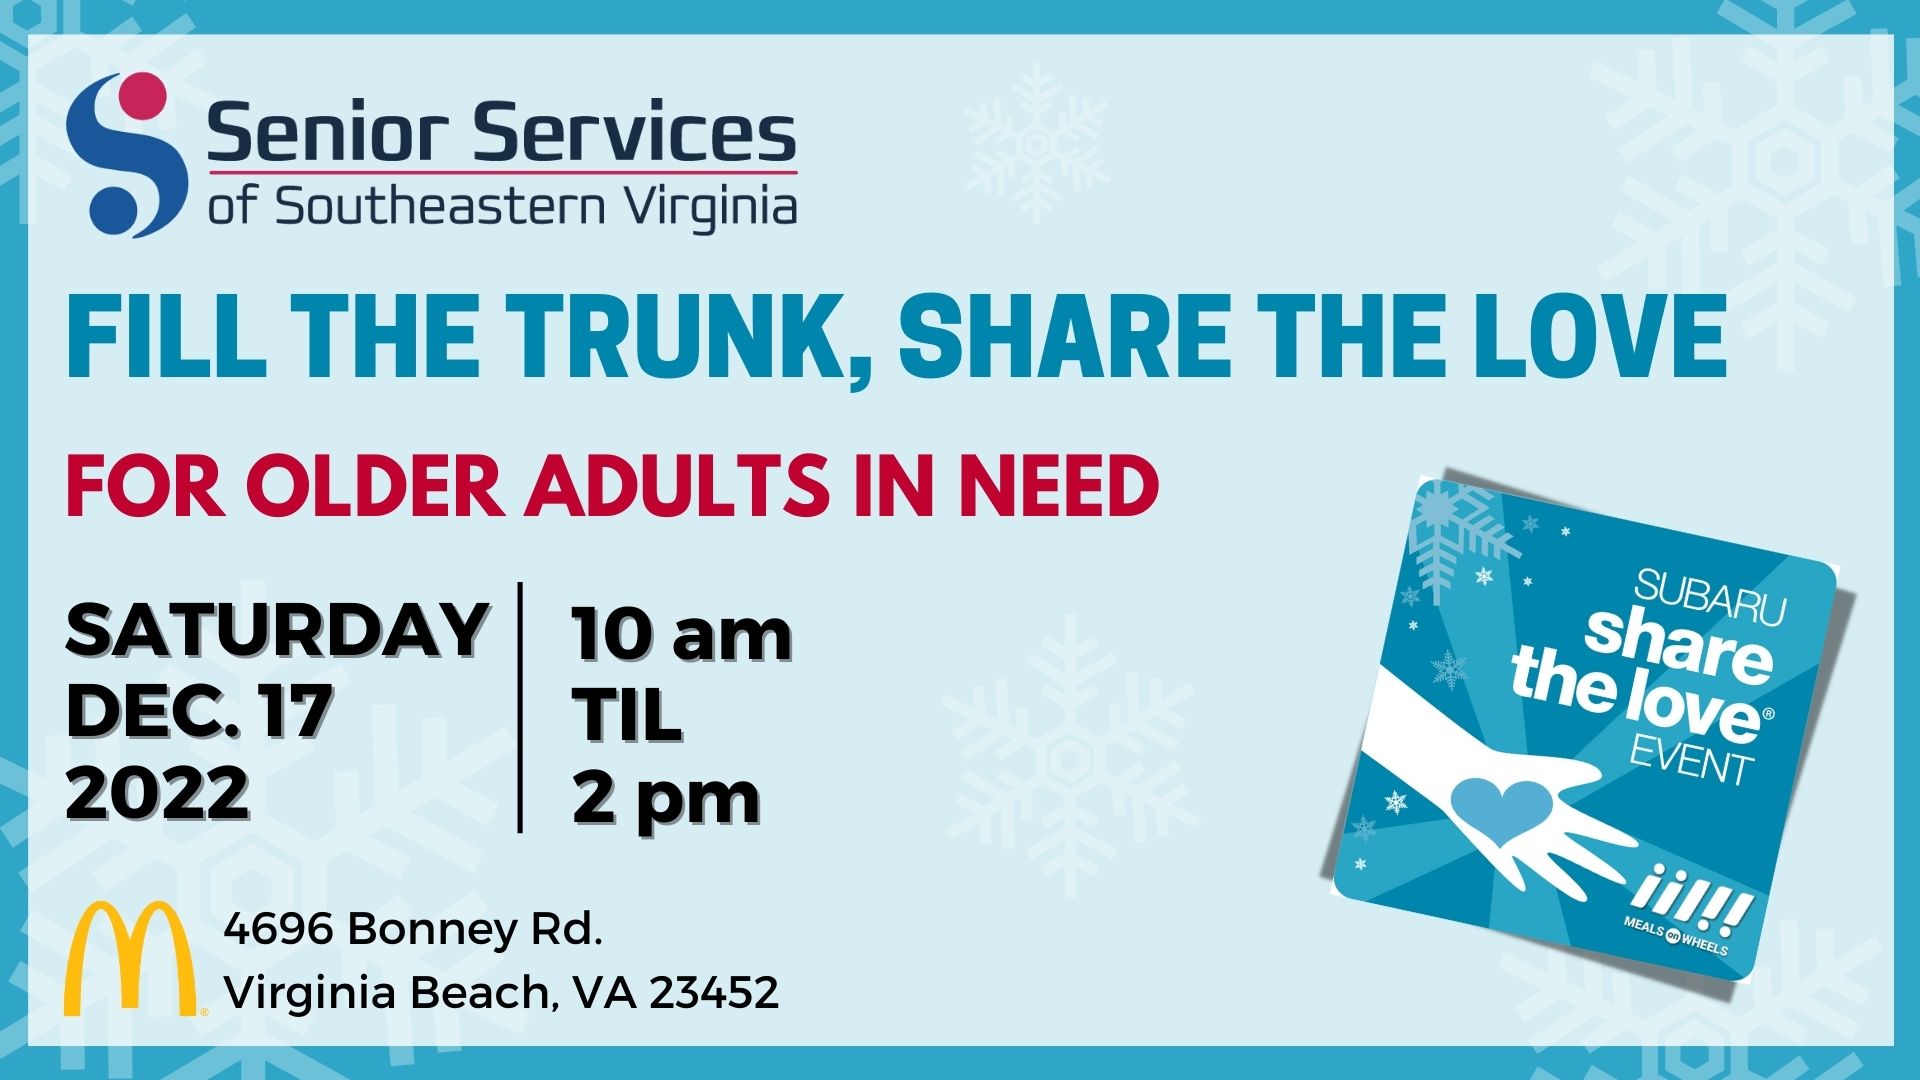 Senior Services to Celebrate the Subaru Share the Love® with Fill the Trunk